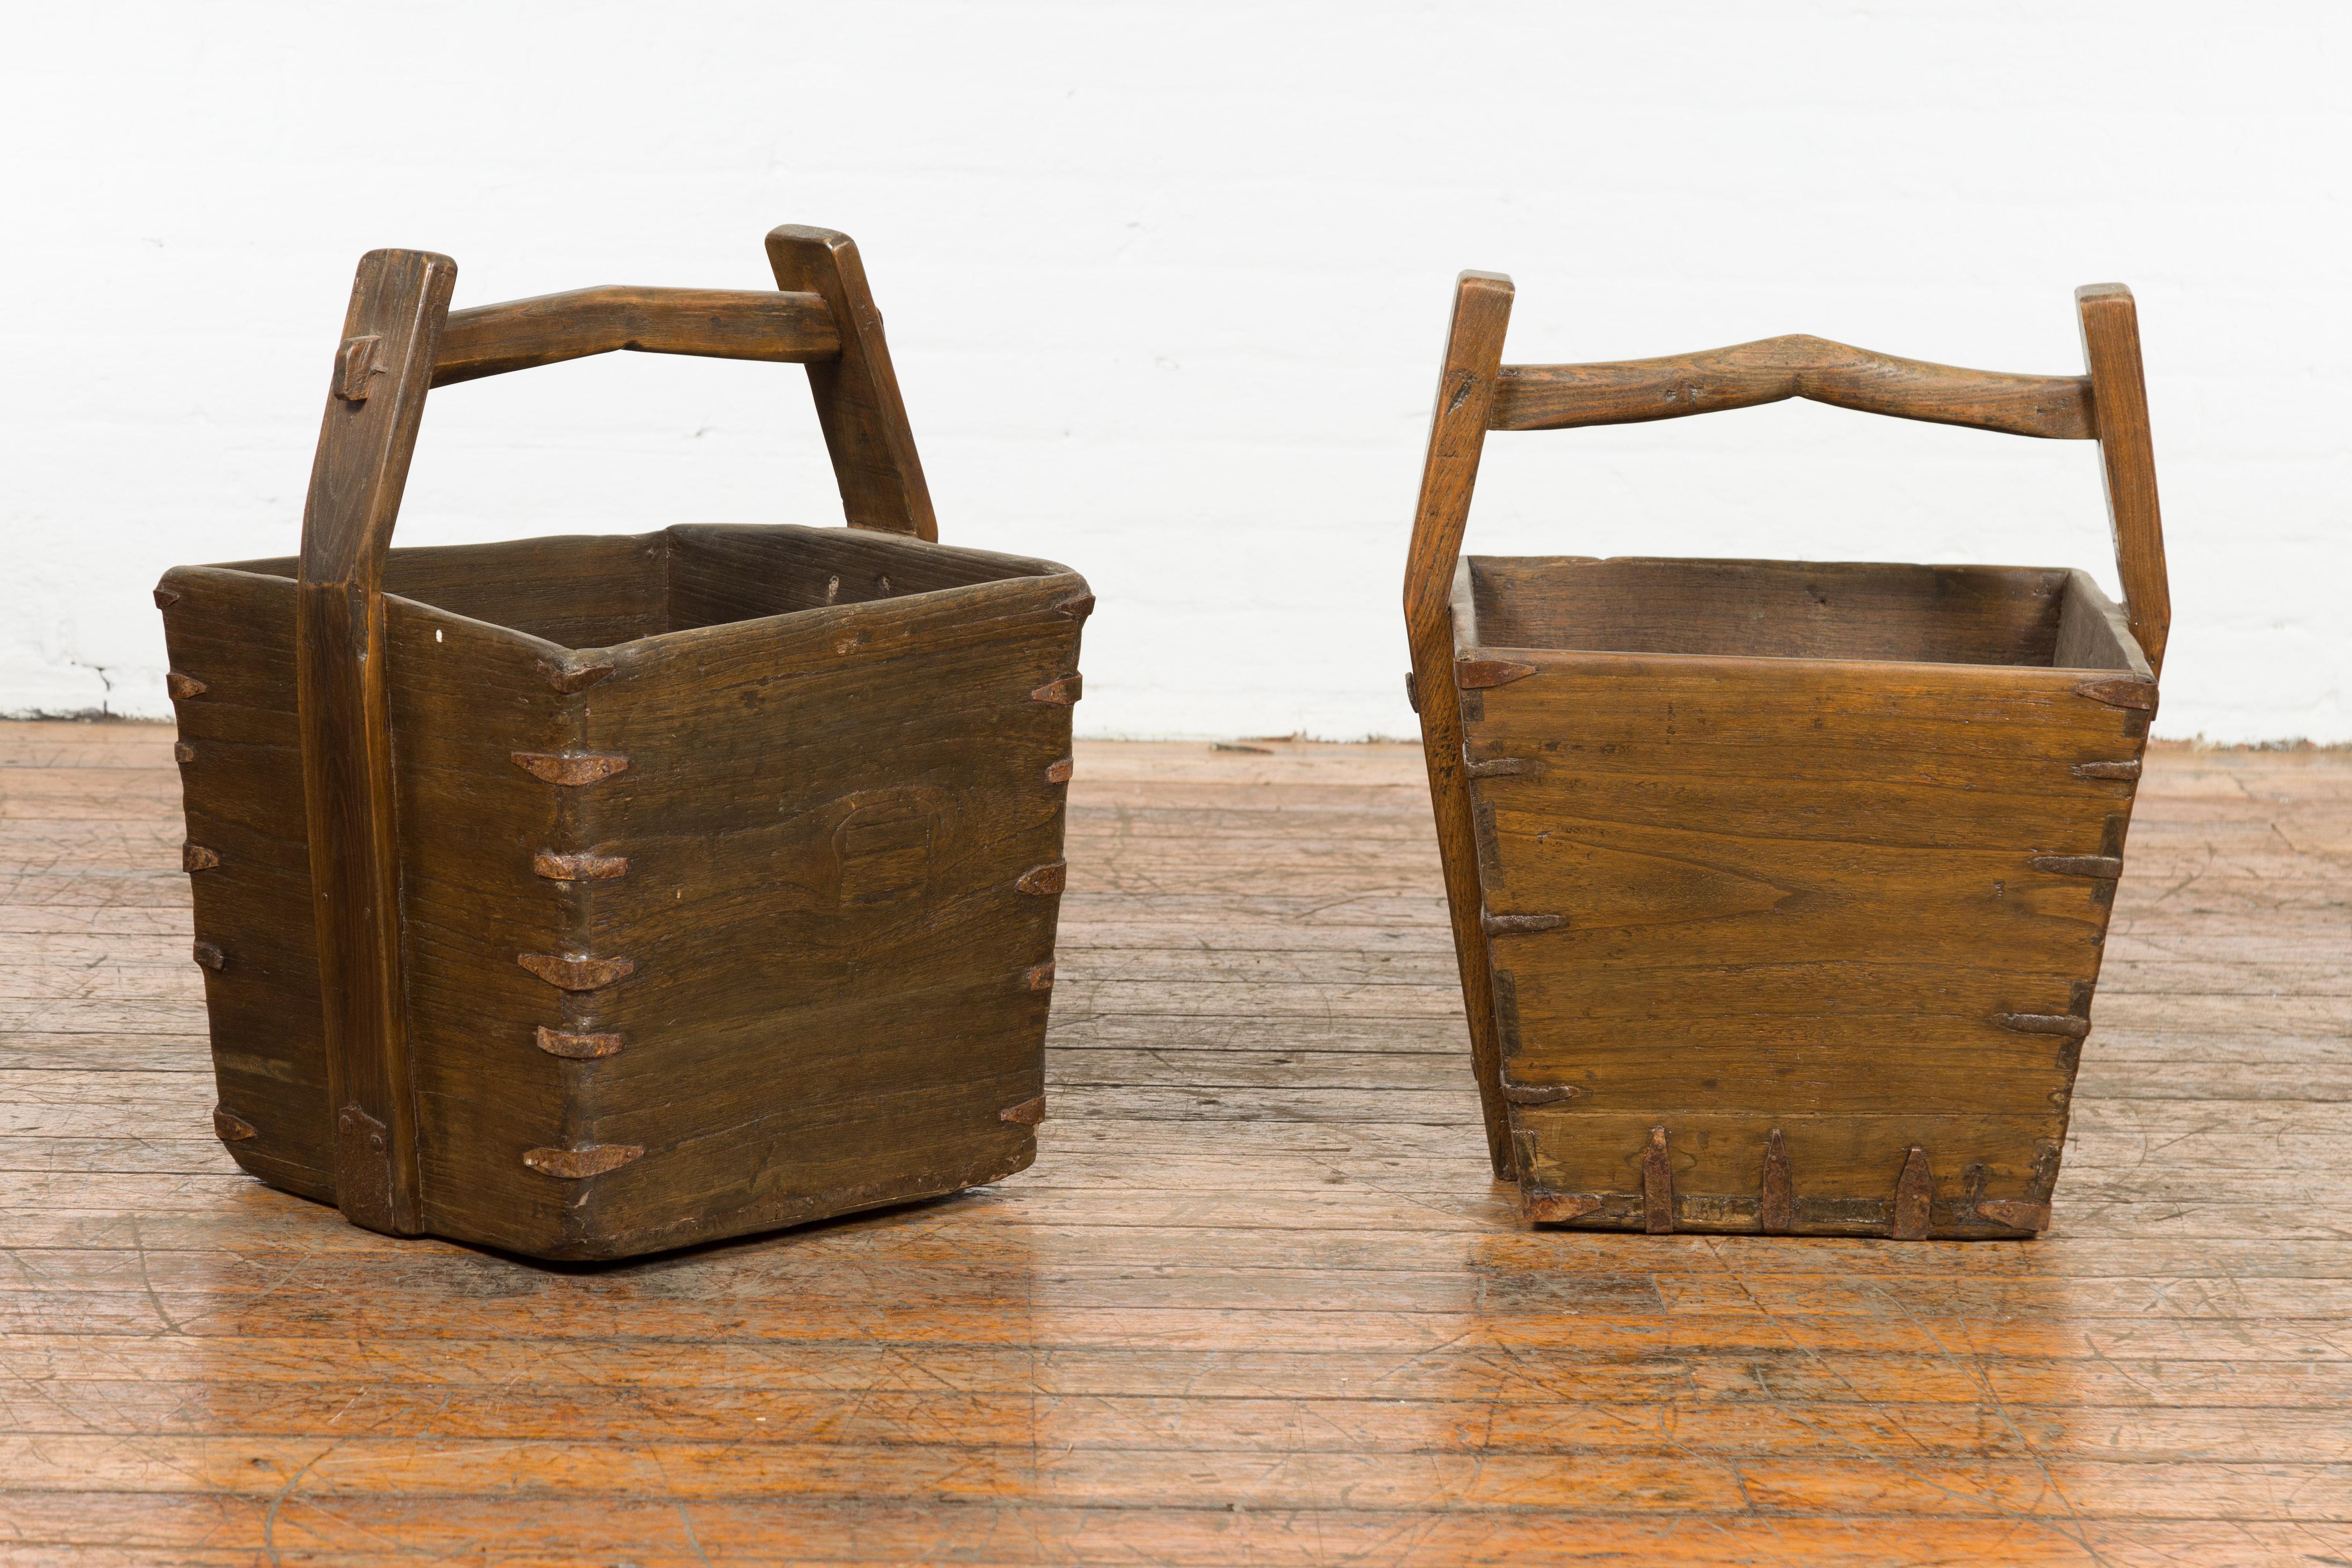 Two rustic Chinese Qing Dynasty period wood grain baskets from the 19th century, with large carrying handles and metal braces. These are priced and sold individually. We also have several baskets coming in different sizes and with different designs.